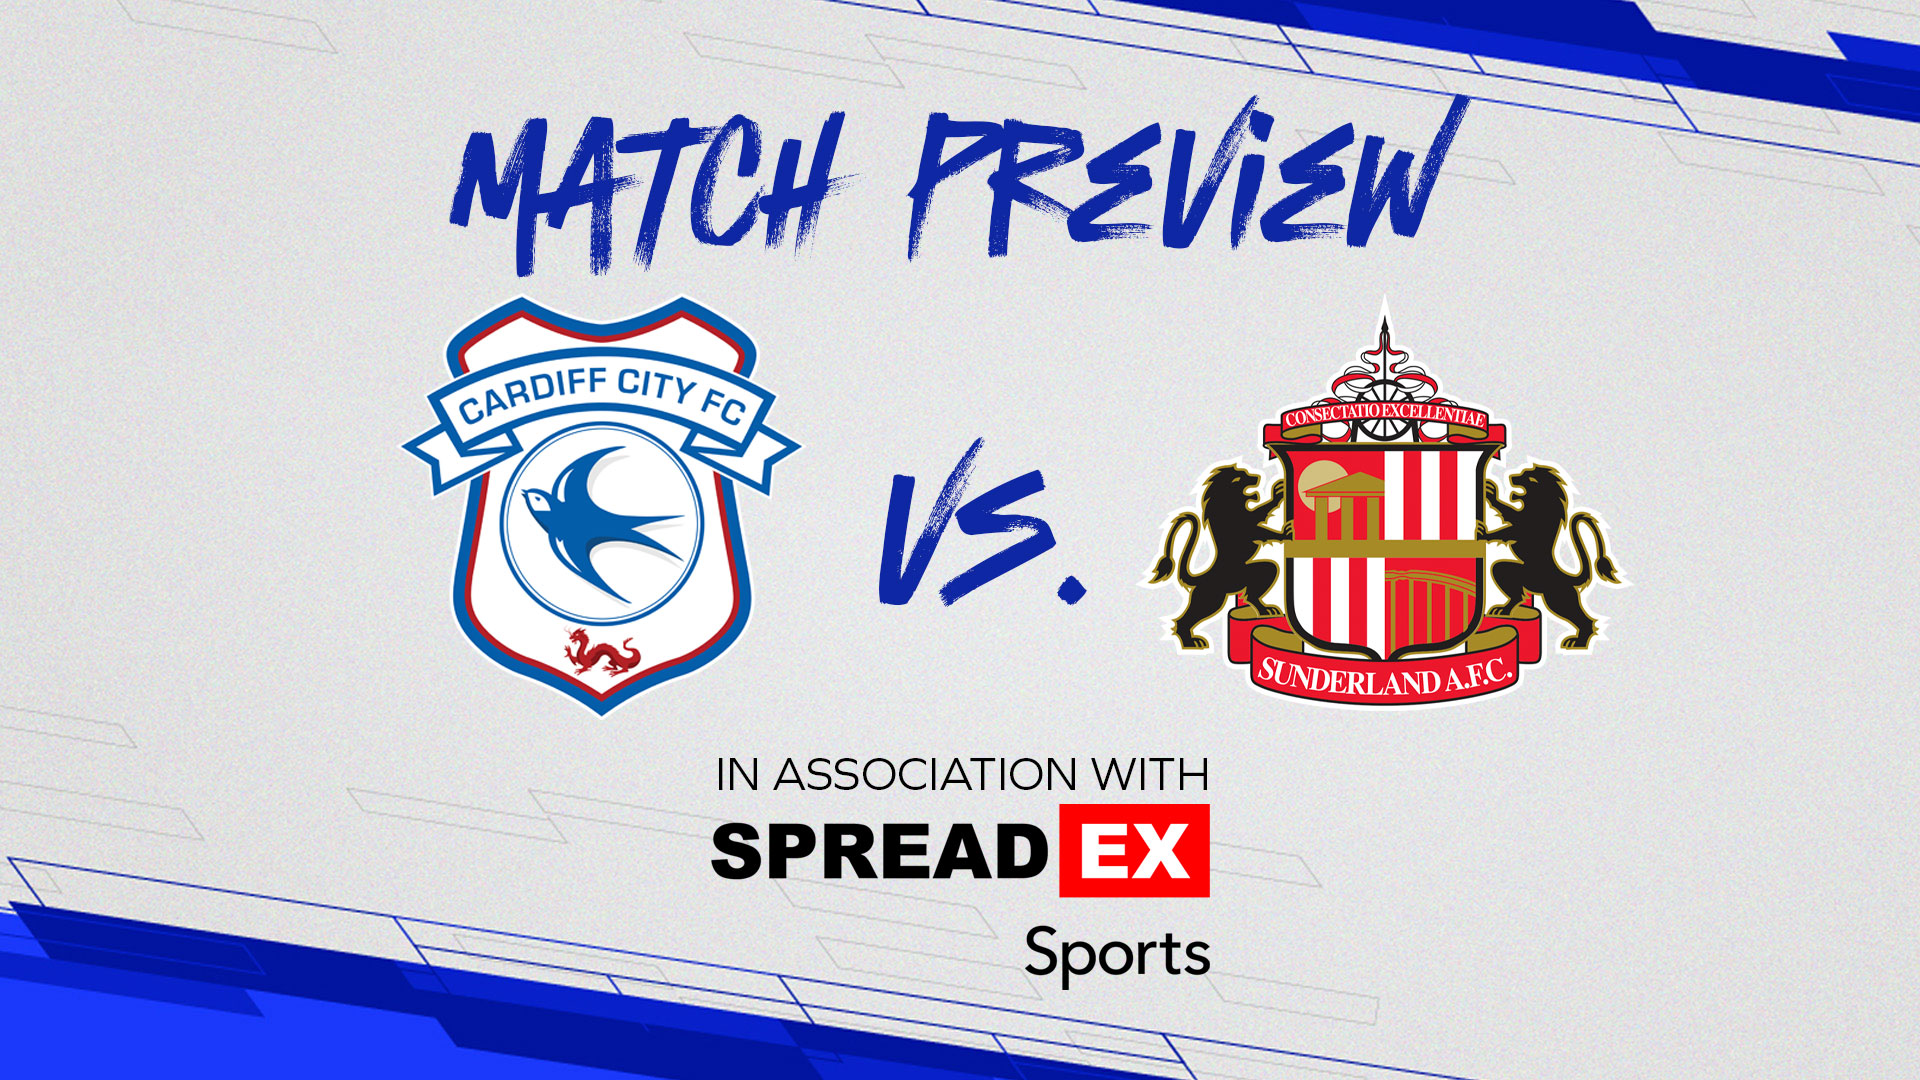 Match Preview: Cardiff City vs. Sunderland